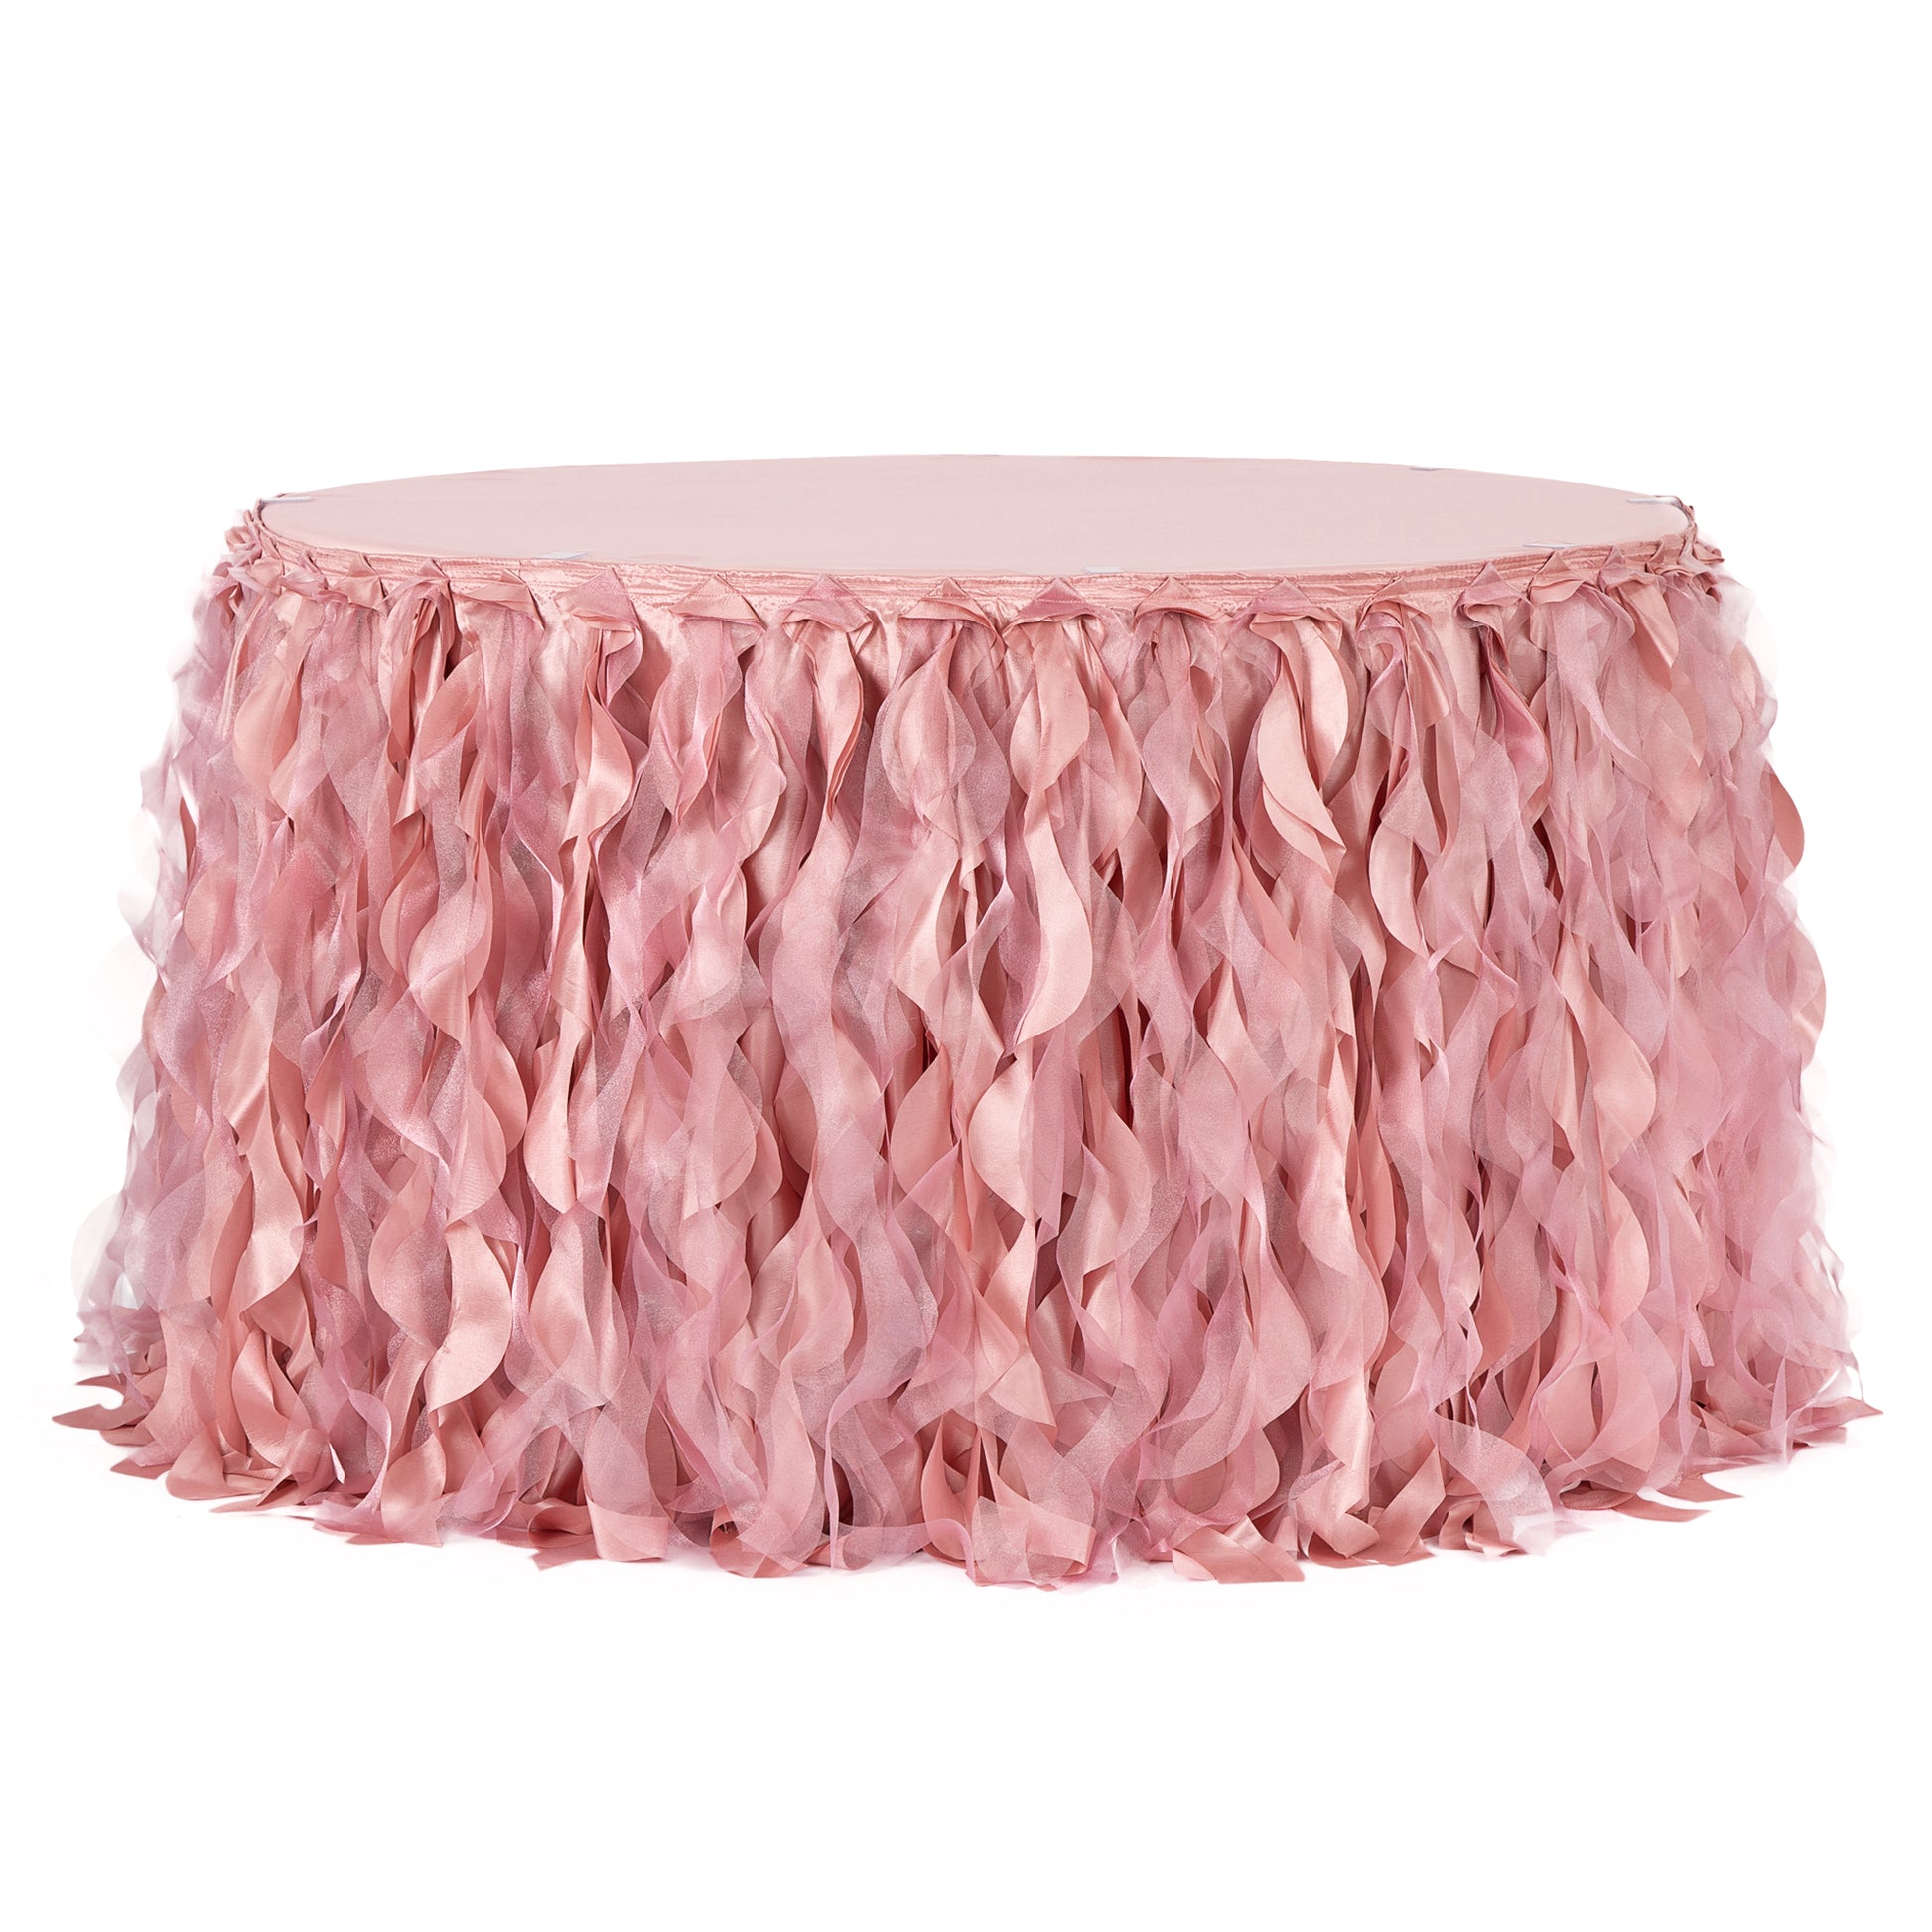 Curly Willow 14ft Table Skirt - Dusty Rose/Mauve - CV Linens